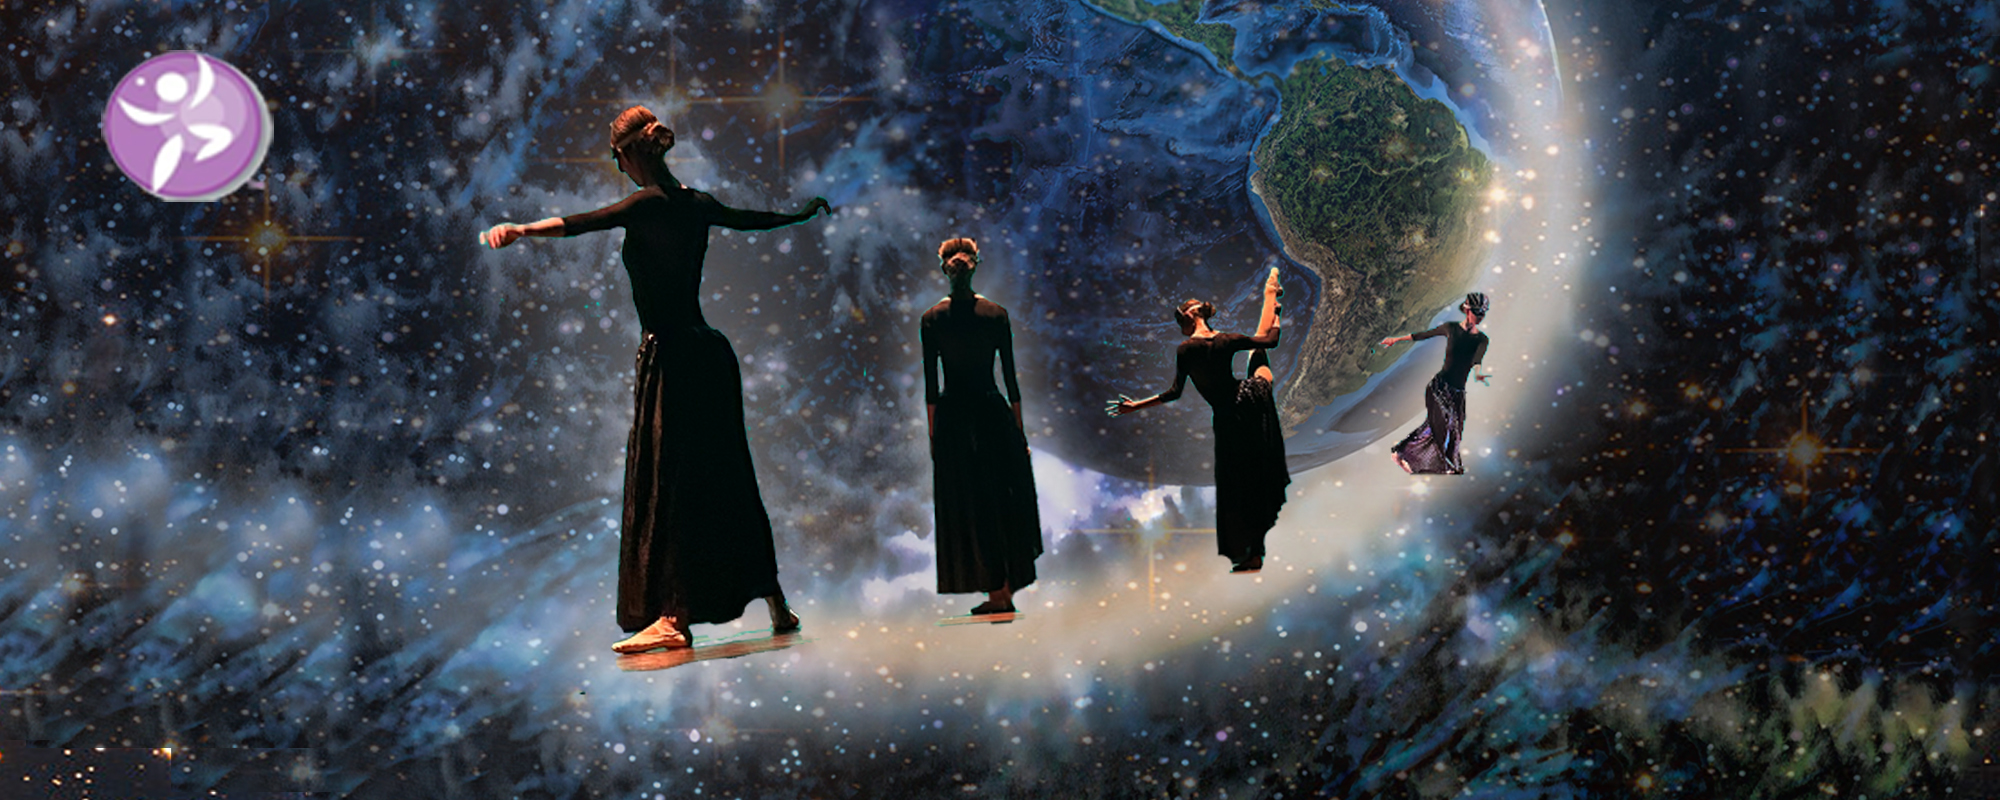 Visual arts collage with human dancing in space with earth in distance.